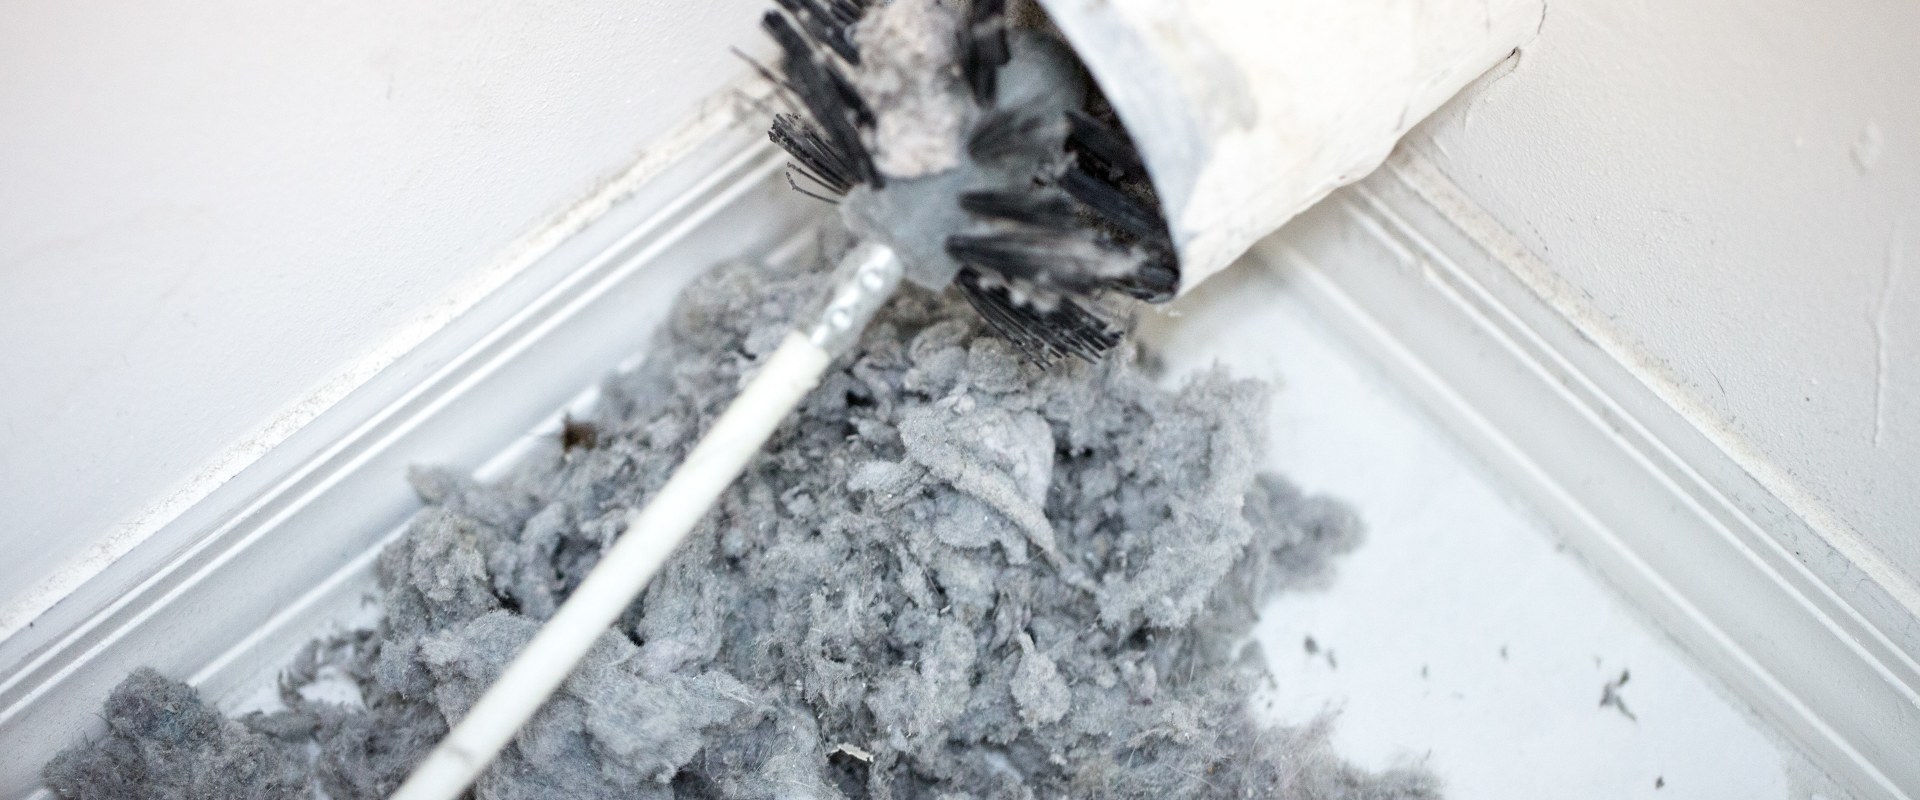 Dryer Vent Cleaning - A Step-by-Step Process